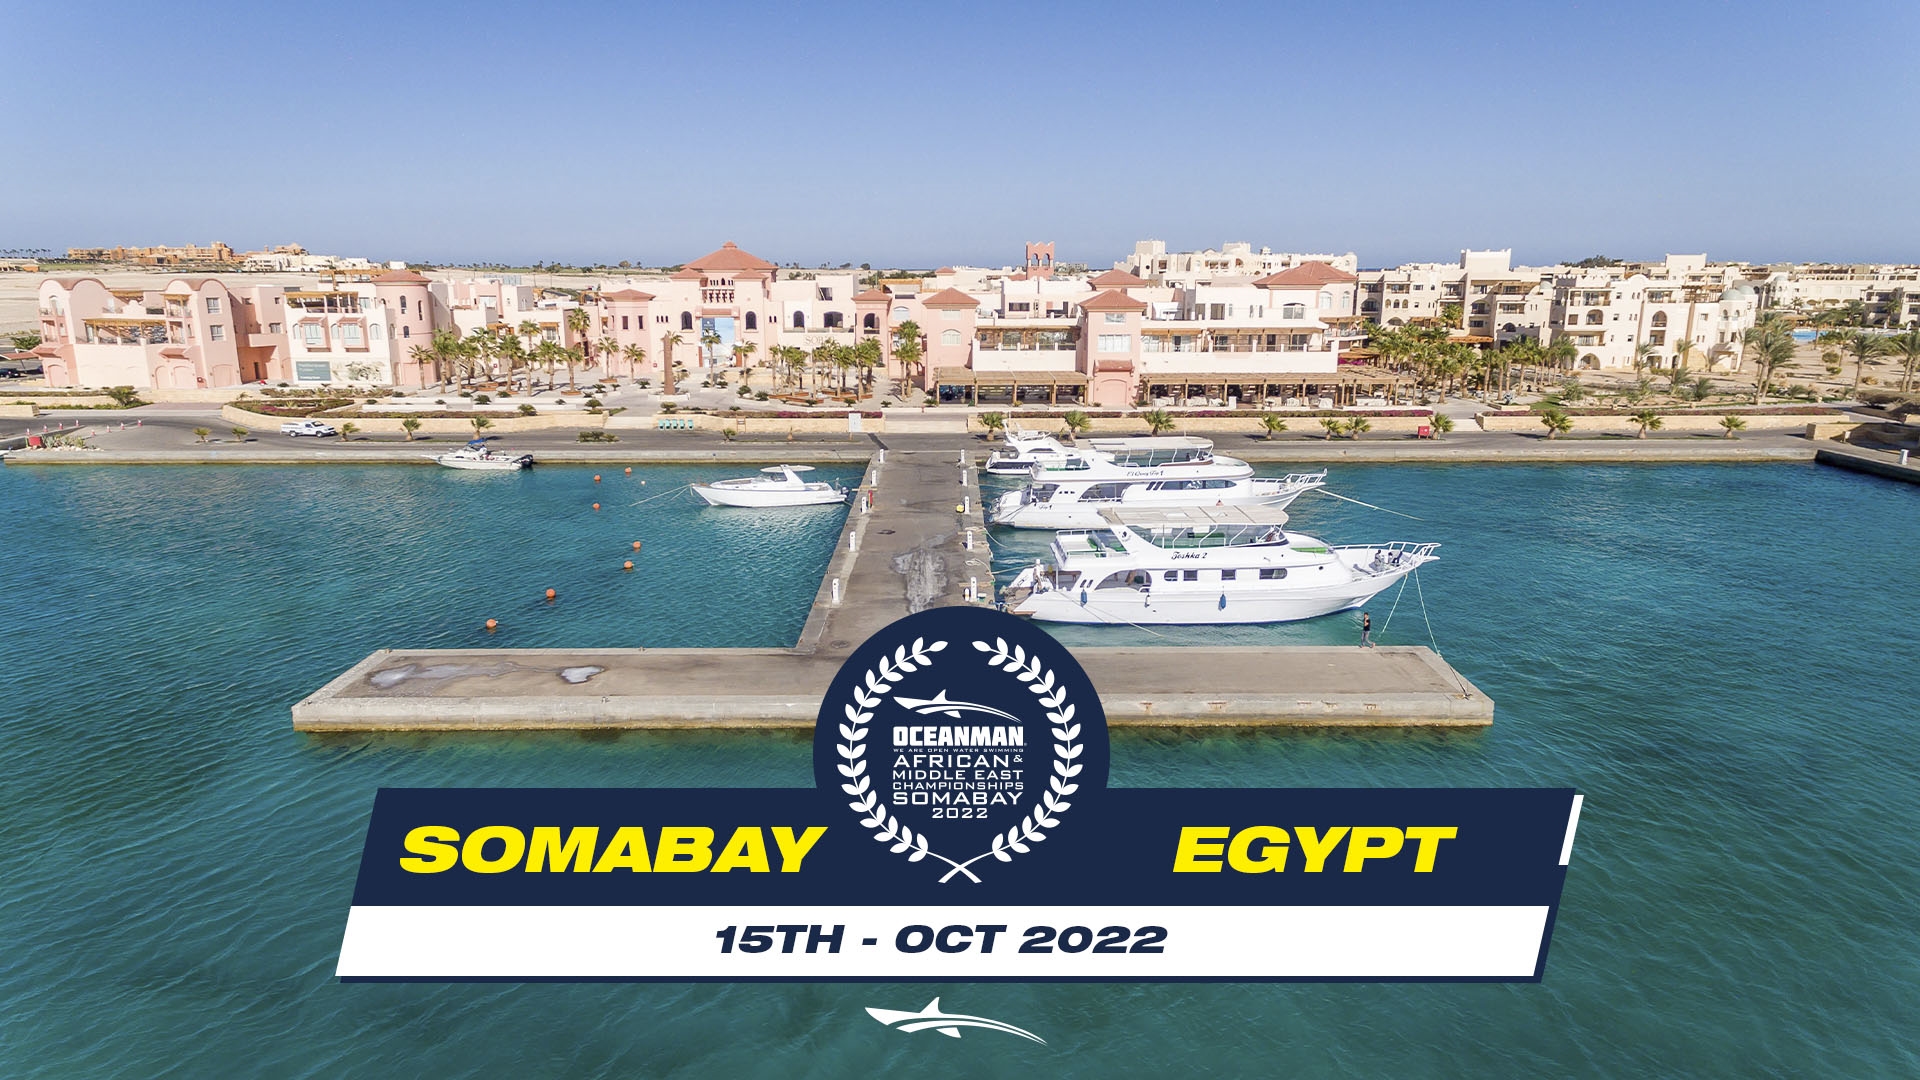 OCEANMAN SOMABAY AFRICAN AND MIDDLE EAST CHAMPIONSHIPS - EGYPT 2022